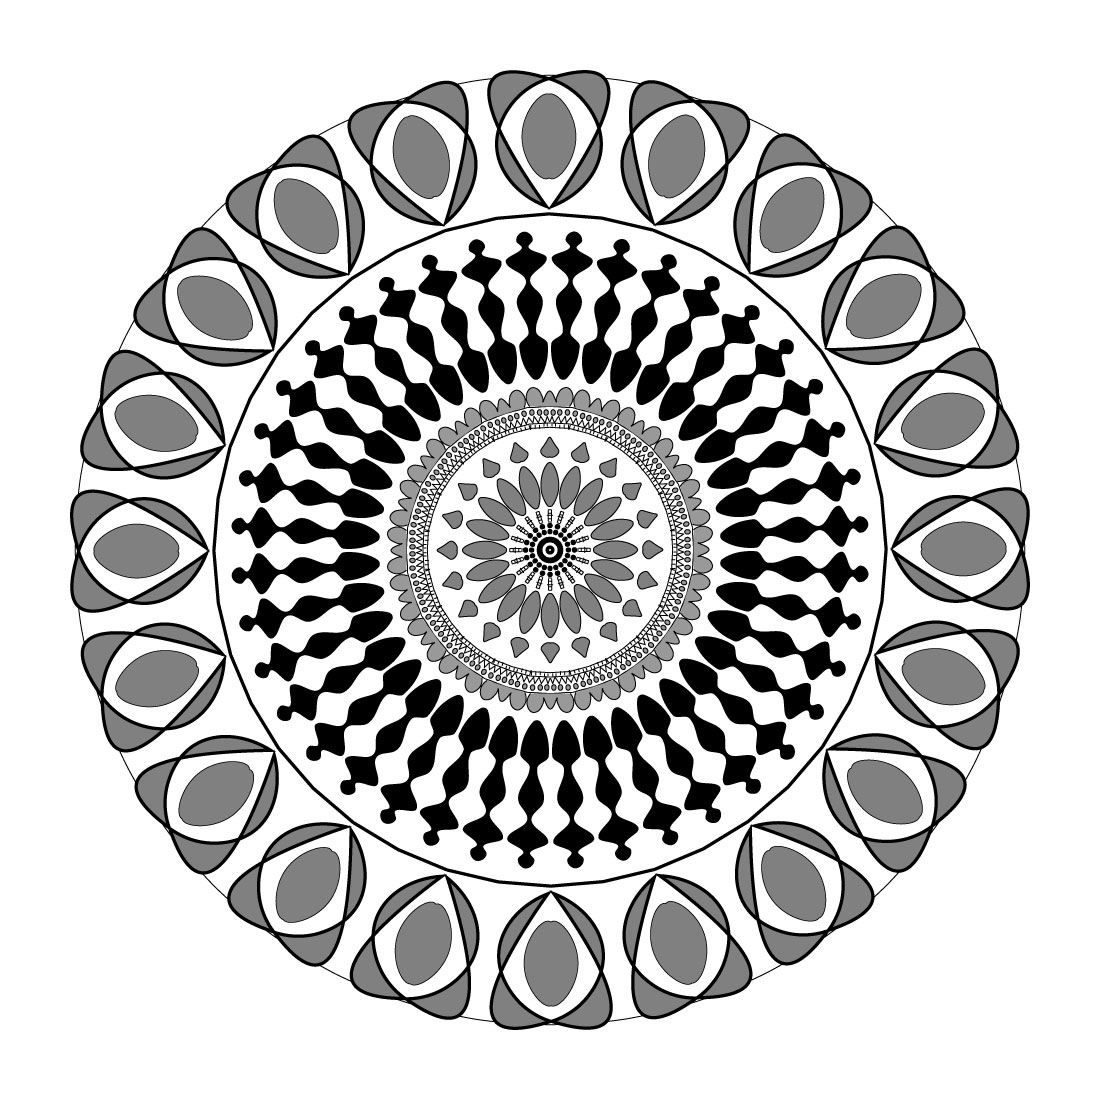 Mandala Art with Black rings and gray background cover image.